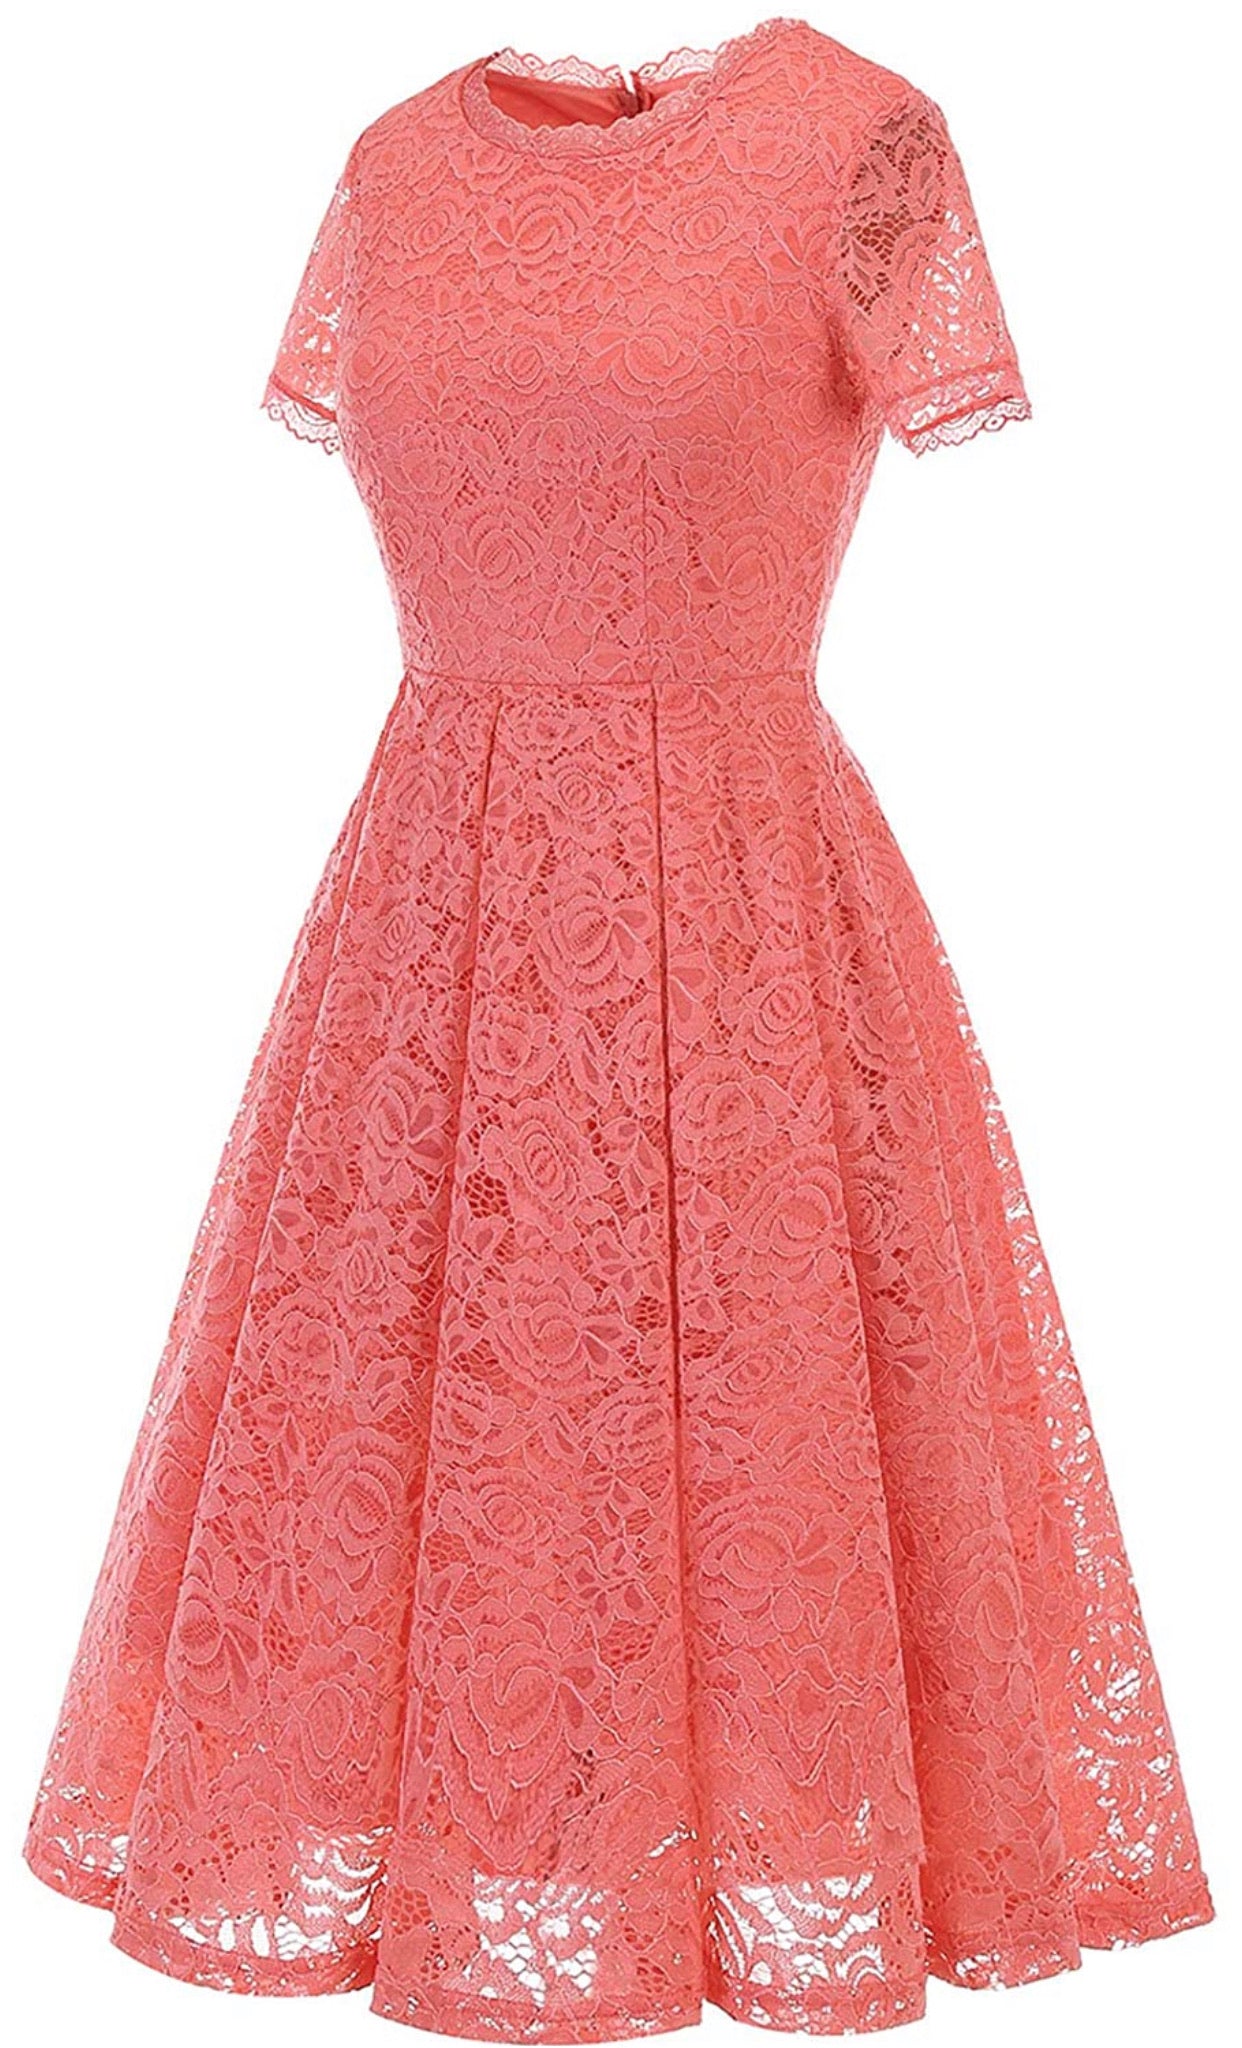 Elegant Lace Bridesmaid Dress, Sizes Small to 3XLarge (Coral)